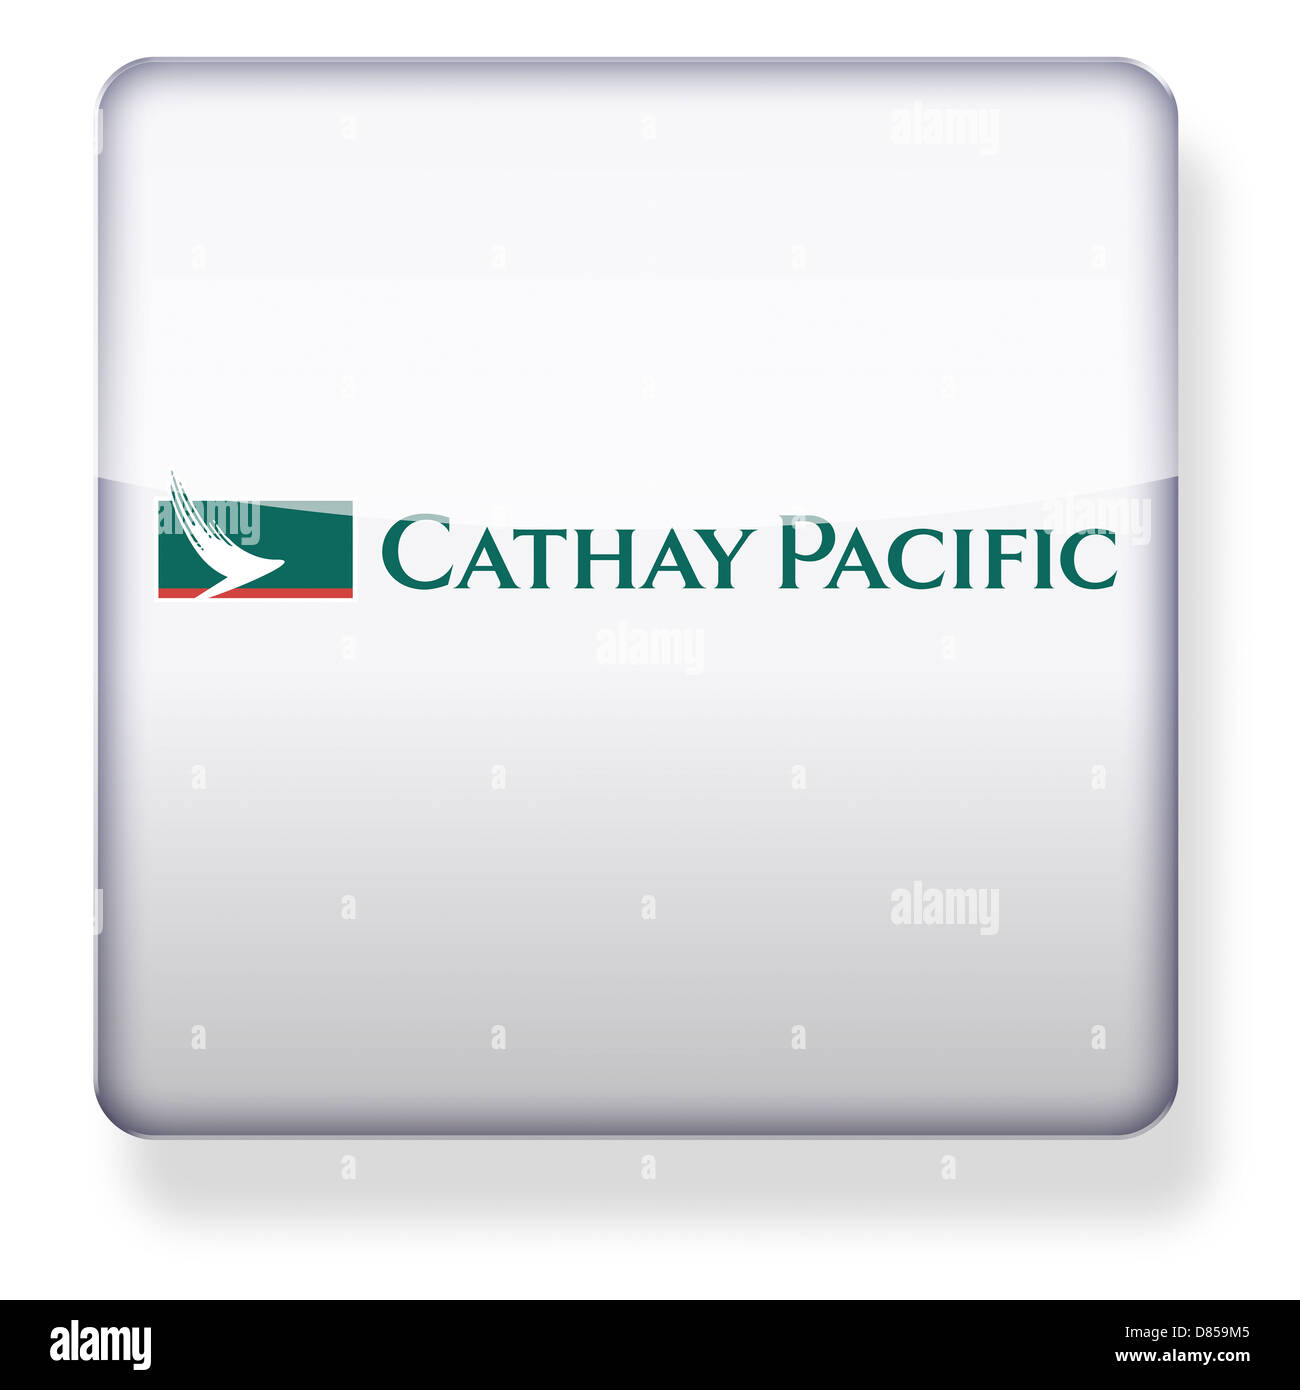 Cathay Pacific logo as an app icon. Clipping path included. Stock Photo